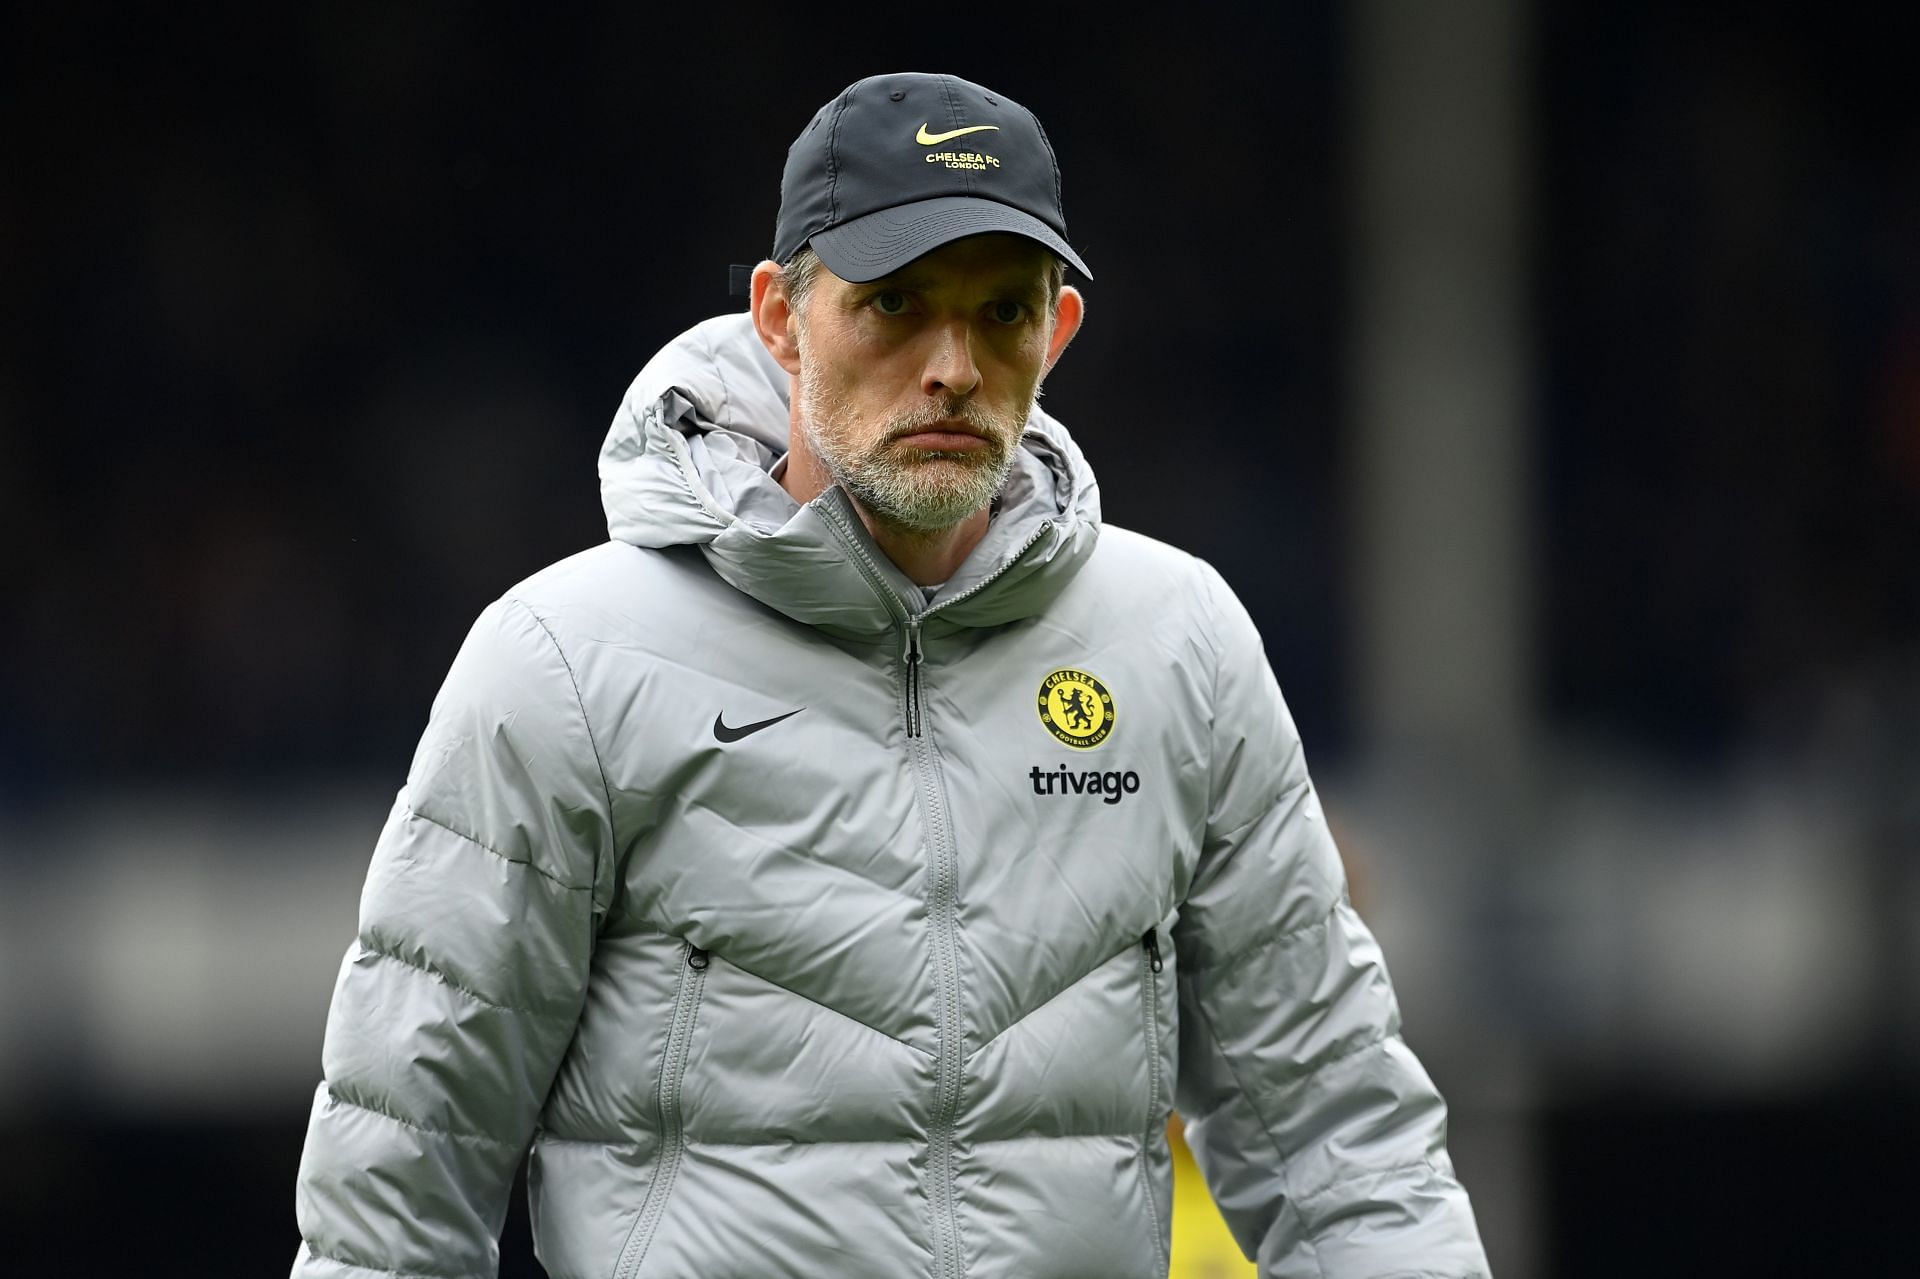 Chelsea manager Thomas Tuchel is likely to have an eventful summer